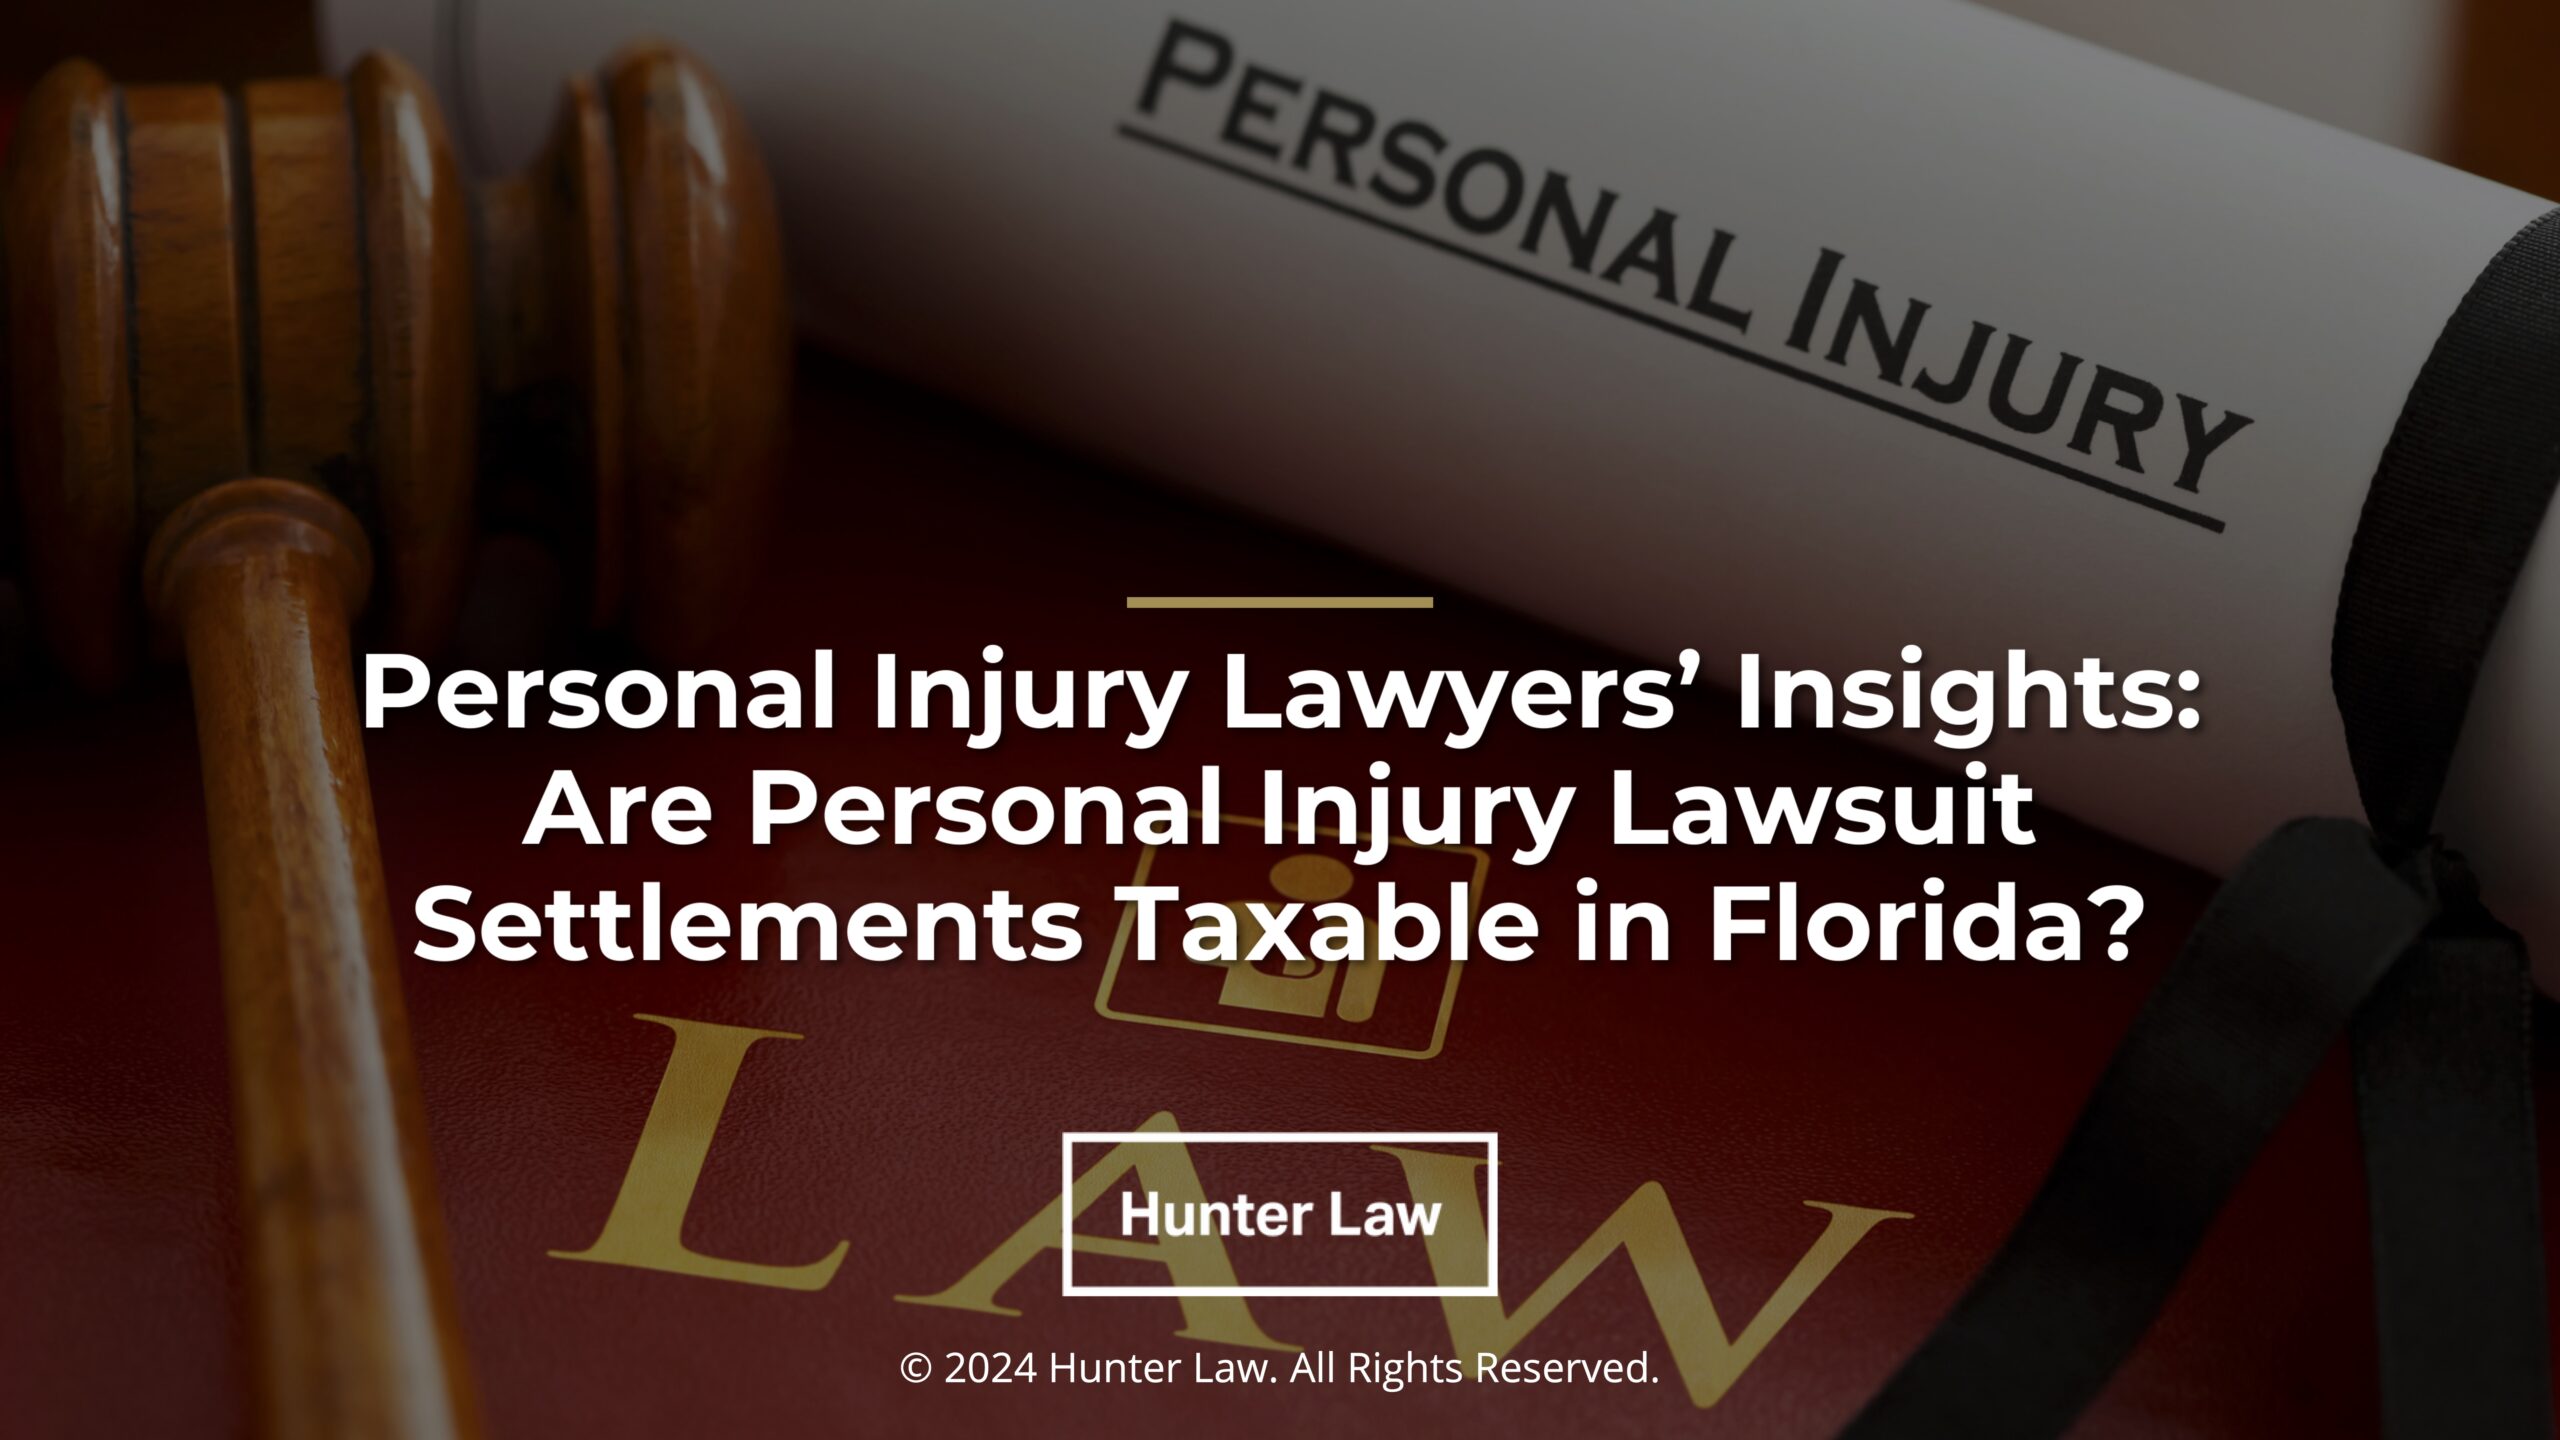 Hunter Law_Featured – Personal Injury Lawyers’ Insights – Are Personal Injury Lawsuit Settlements Taxable in Florida